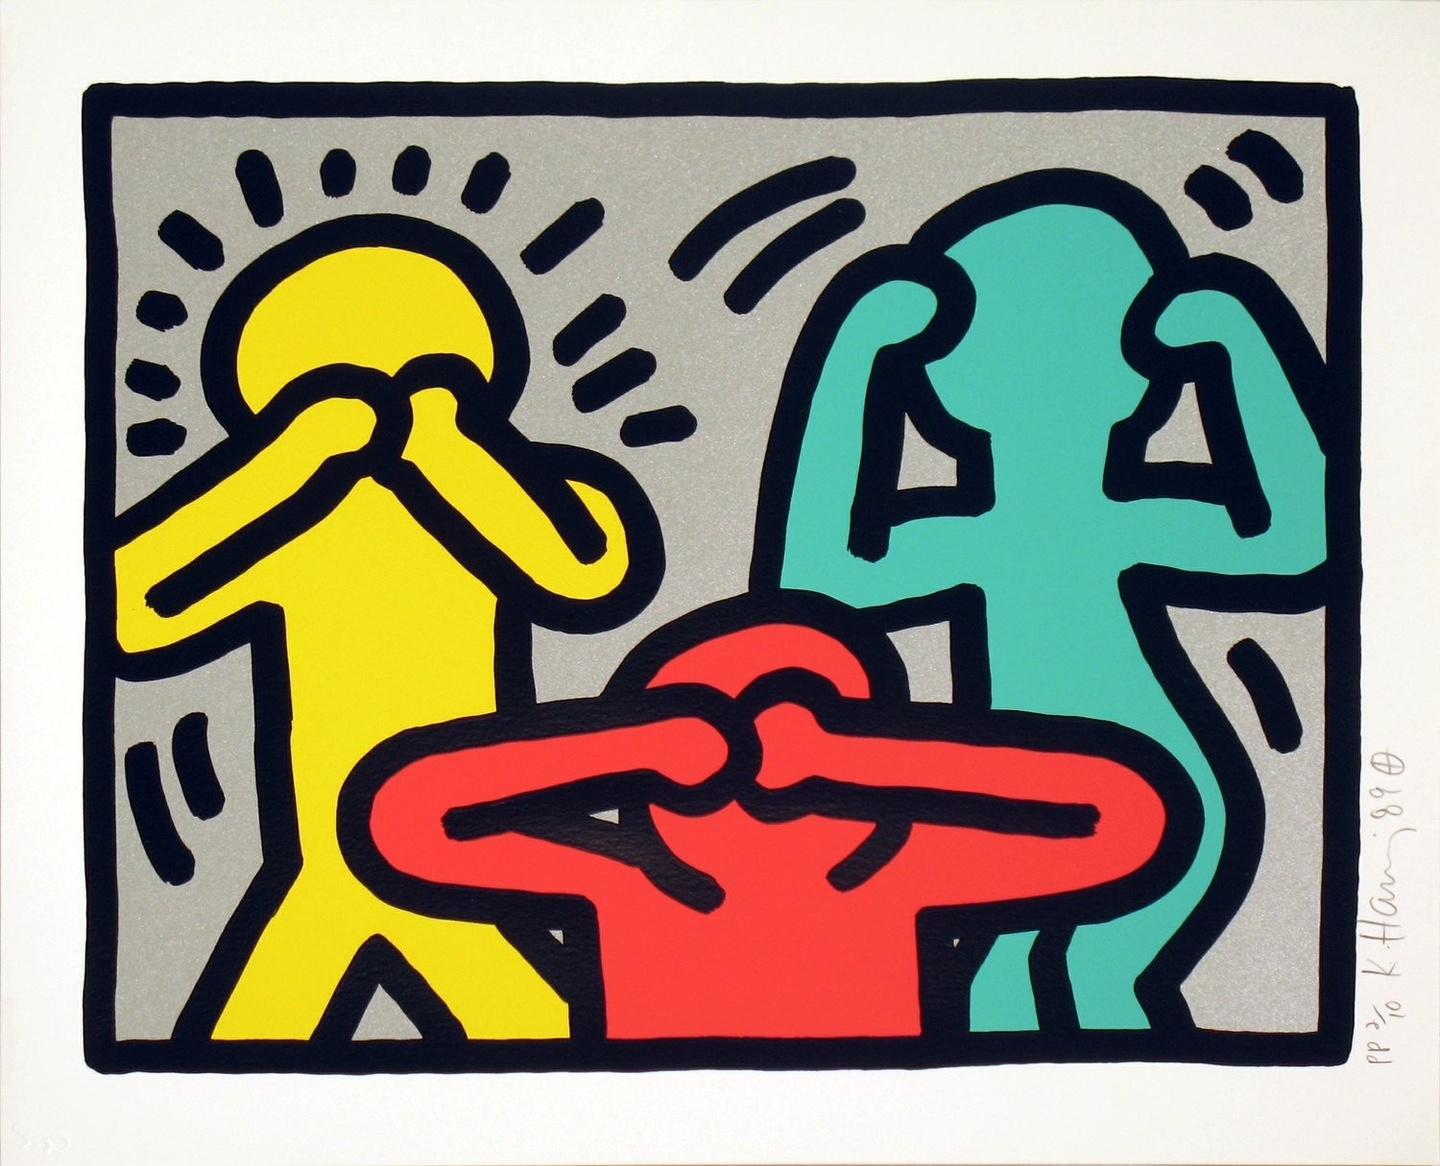 A Keith Haring illustration featuring three silhouette figures in yellow, red and blue